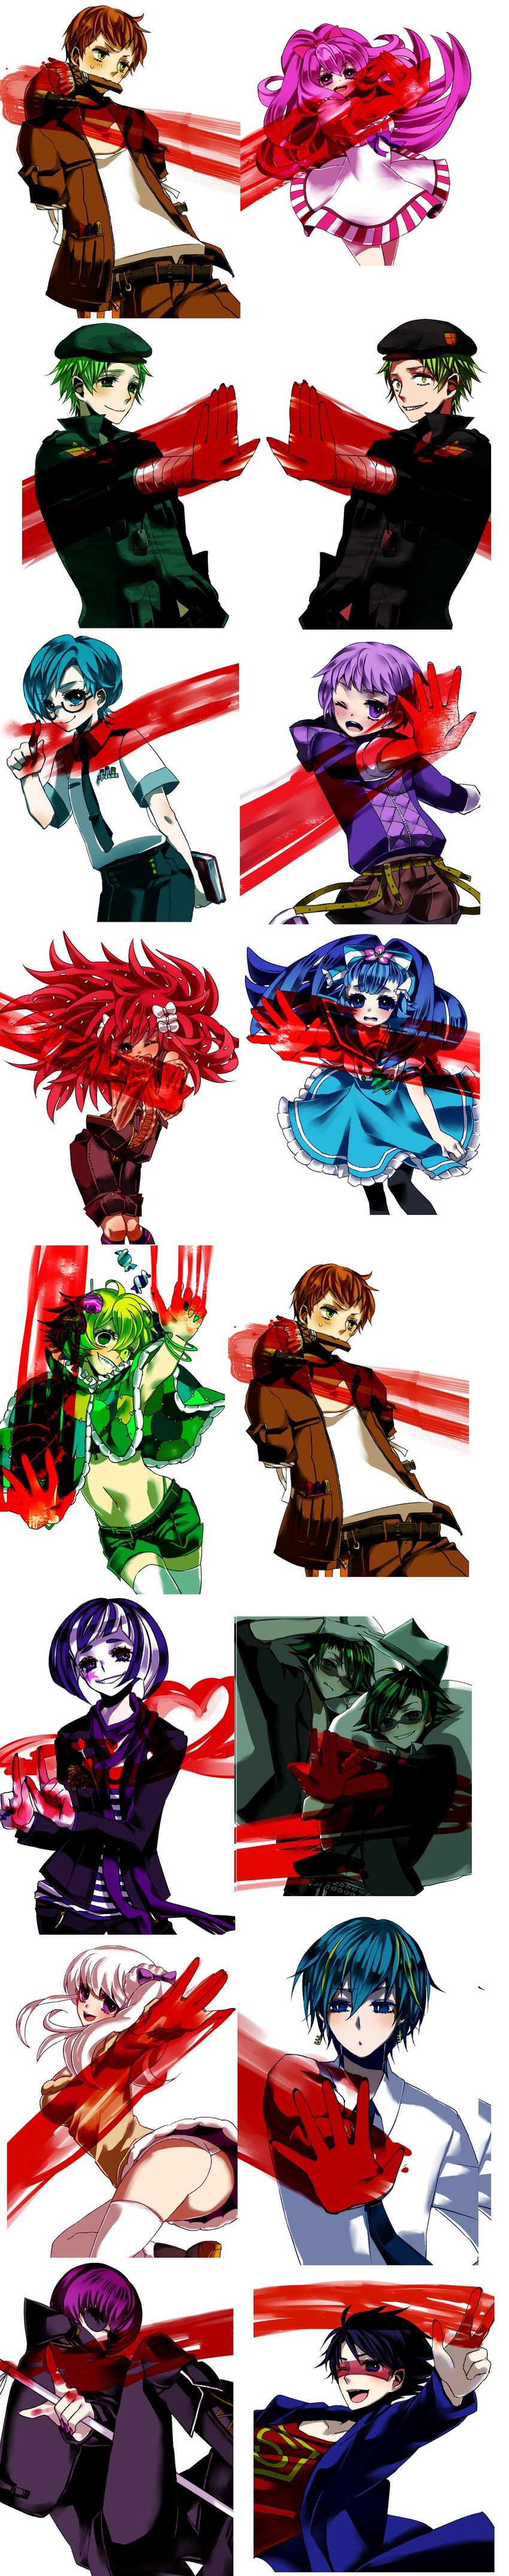 absurdres amputee blue_hair chino_machiko flaky flippy giggles green_hair handy happy_tree_friends heterochromia highres lammy lifty long_hair lumpy mask mime multi-colored_hair multicolored_hair nutty petunia pink_hair red_hair shifty short_hair sniffles splendid the_mole toothy